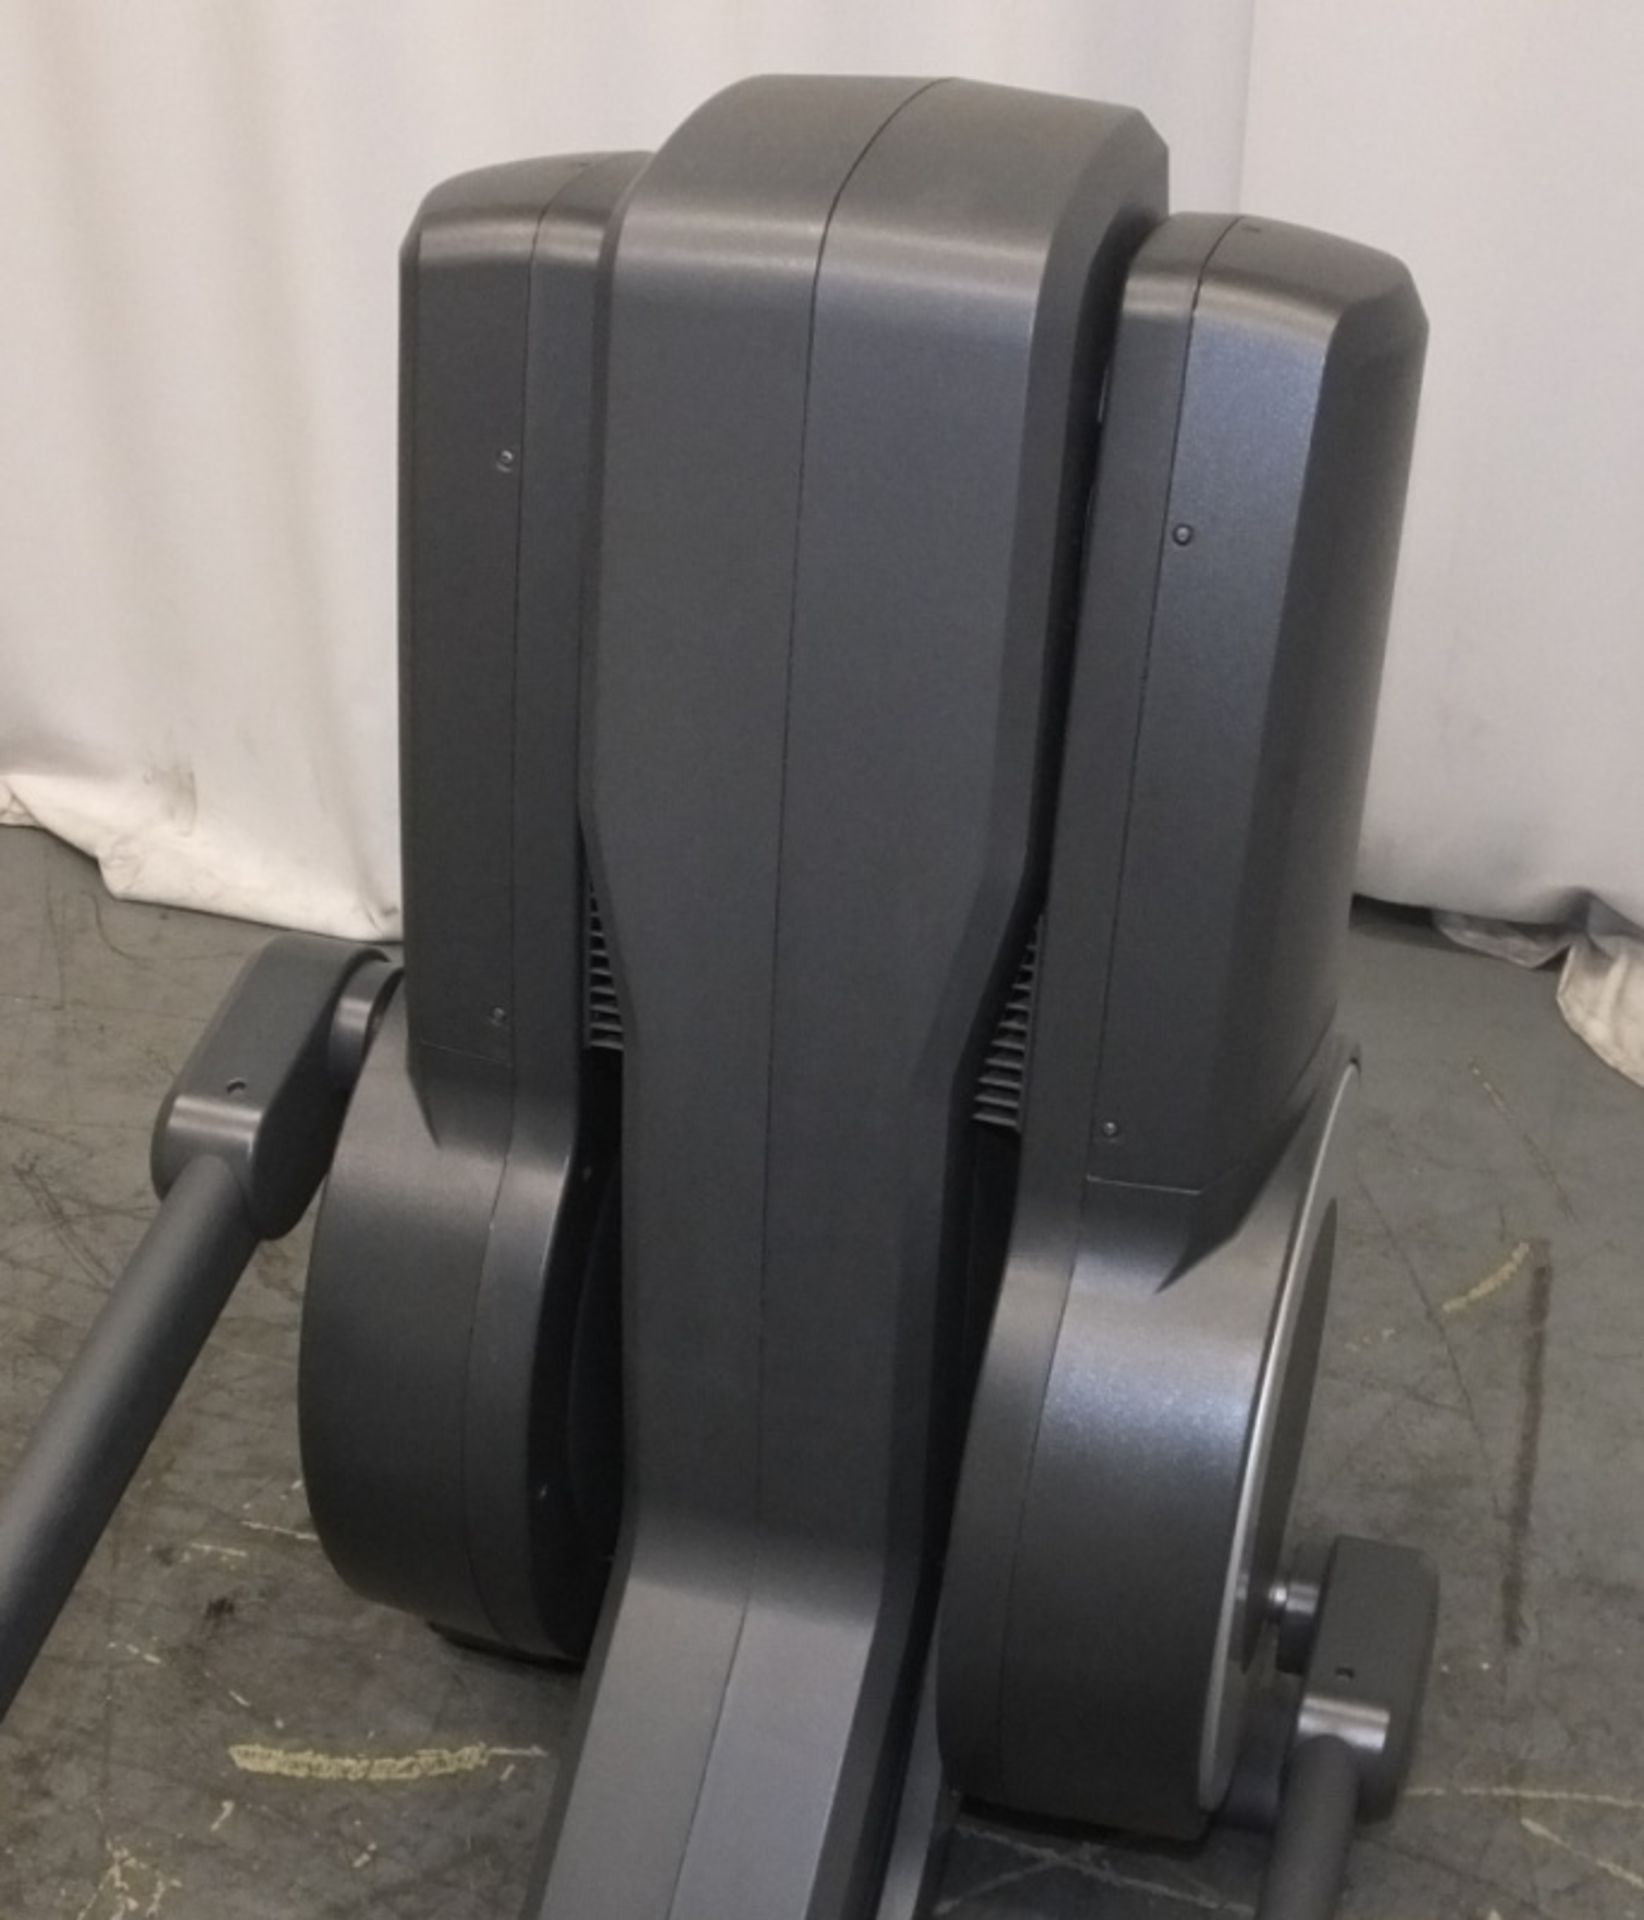 Life Fitness 95x Elliptical Cross Trainer - please check pictures for condition - Image 5 of 16